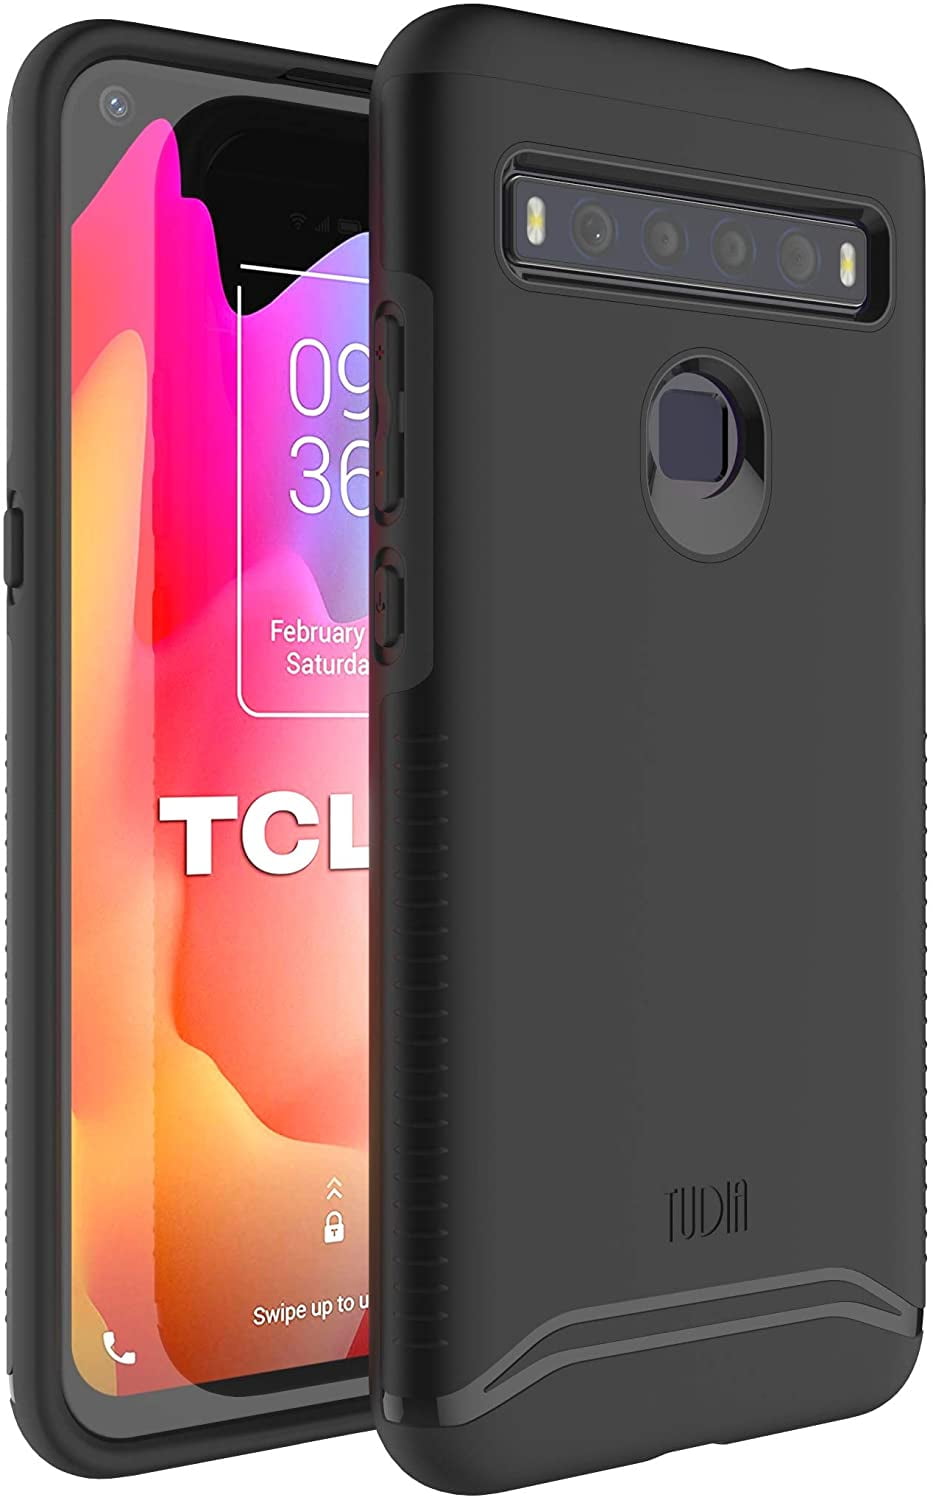 360° Drop Protection Case Full Body Ultra-Thin Soft Silicone Cover KJYF Black Shockproof Bumper Cover Case for TCL 10L Case for TCL 10L Case 6.53 Inch WMA28 